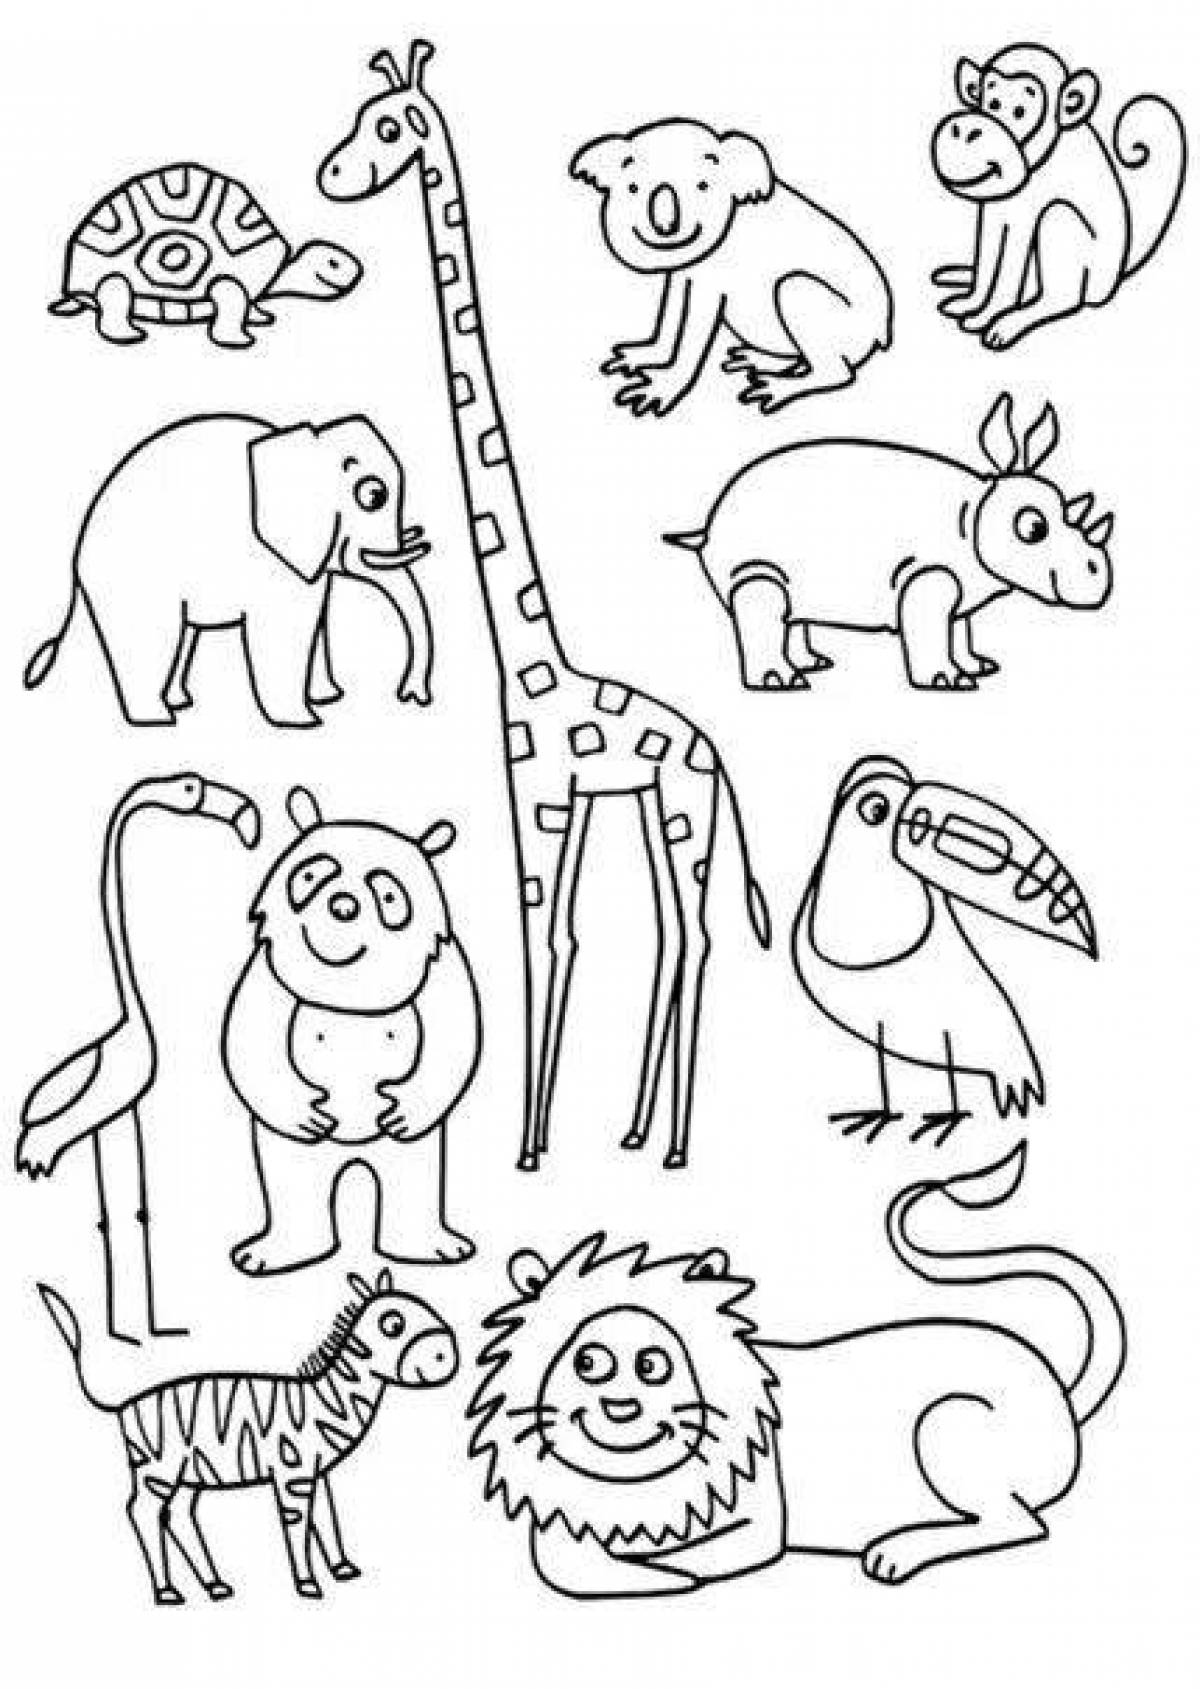 Great zoo coloring book